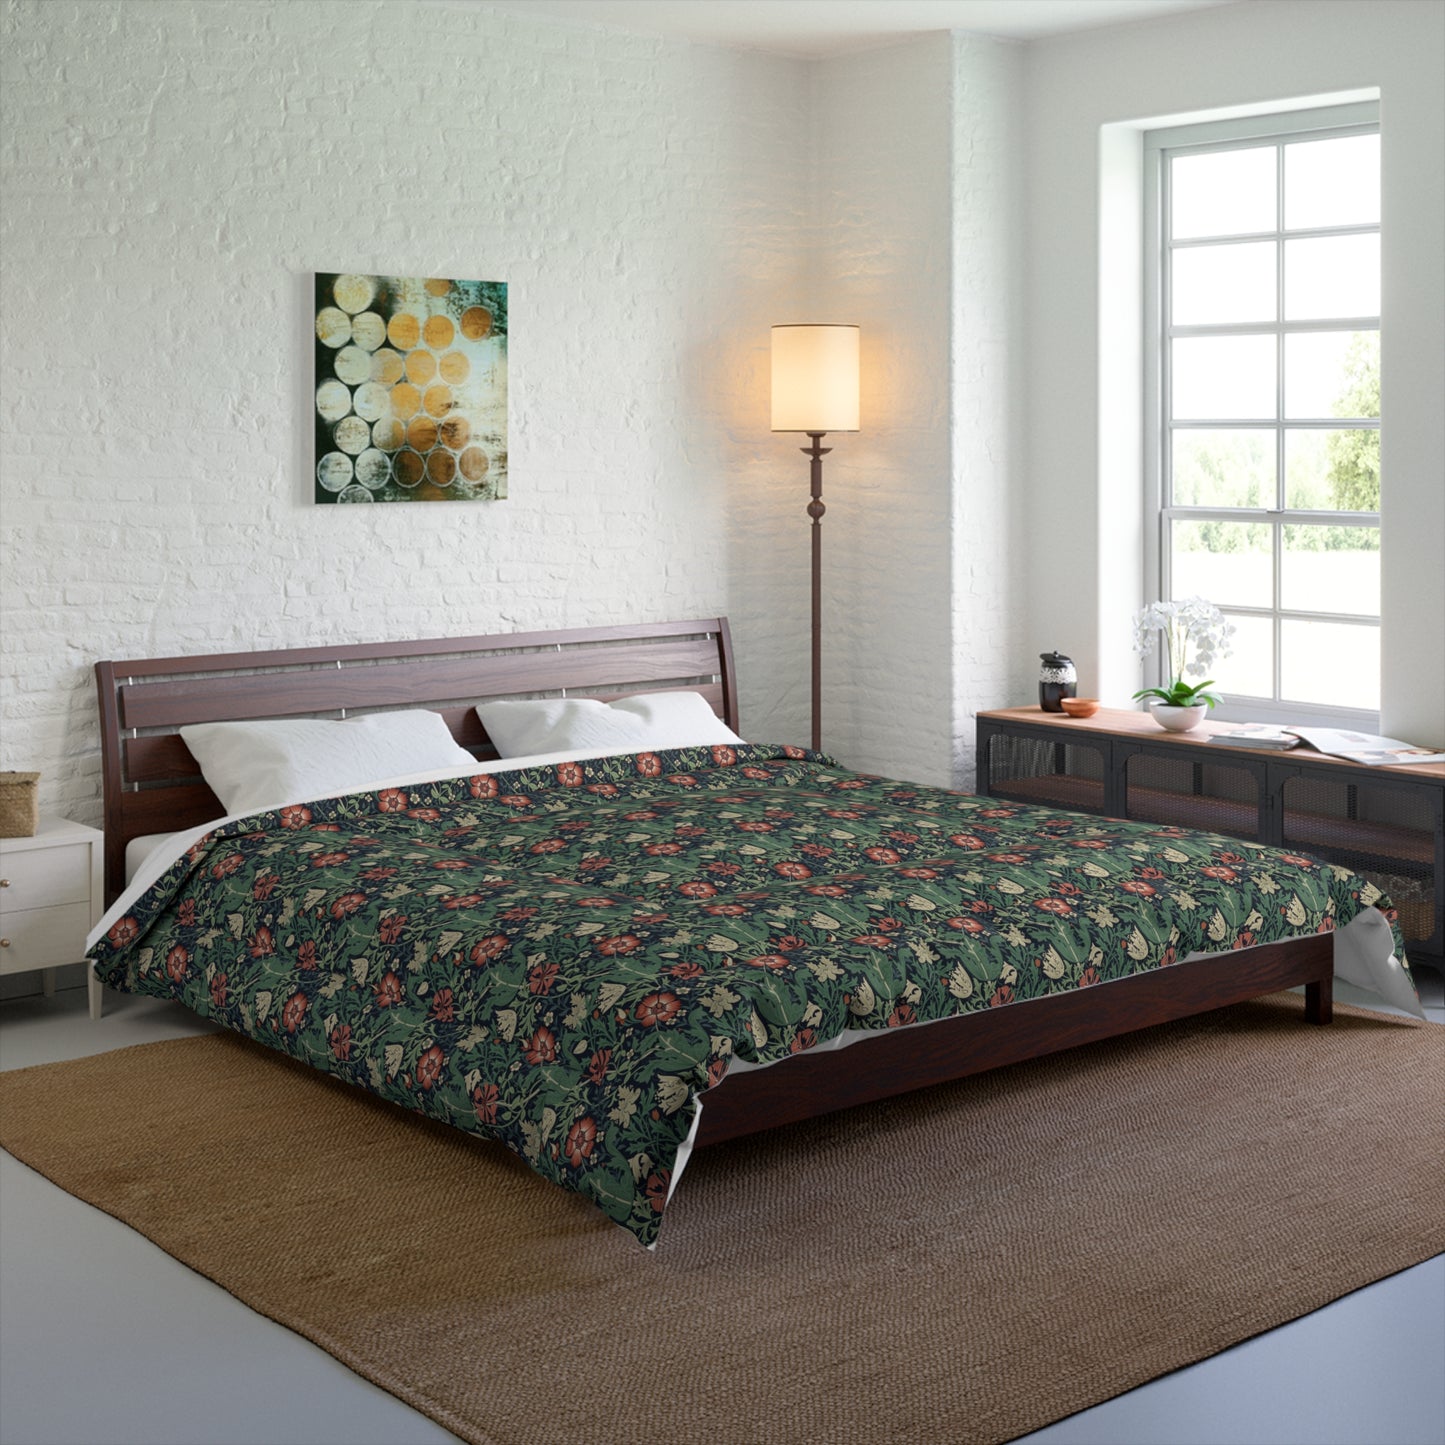 william-morris-co-comforter-compton-collection-hill-cottage-5